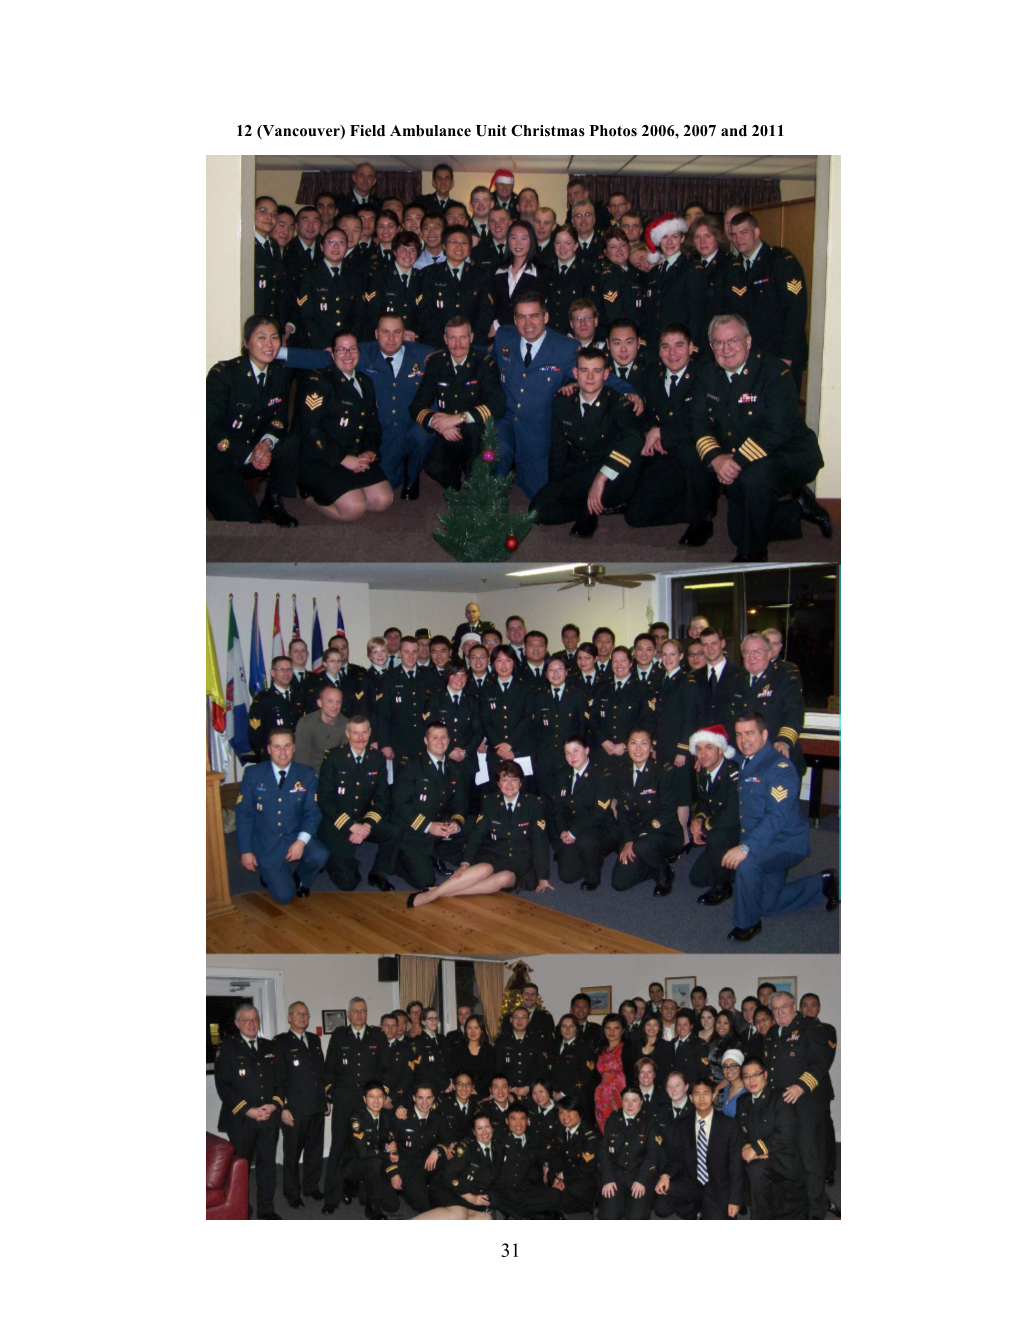 12 (Vancouver) Field Ambulance Unit Christmas Photos 2006, 2007 and 2011